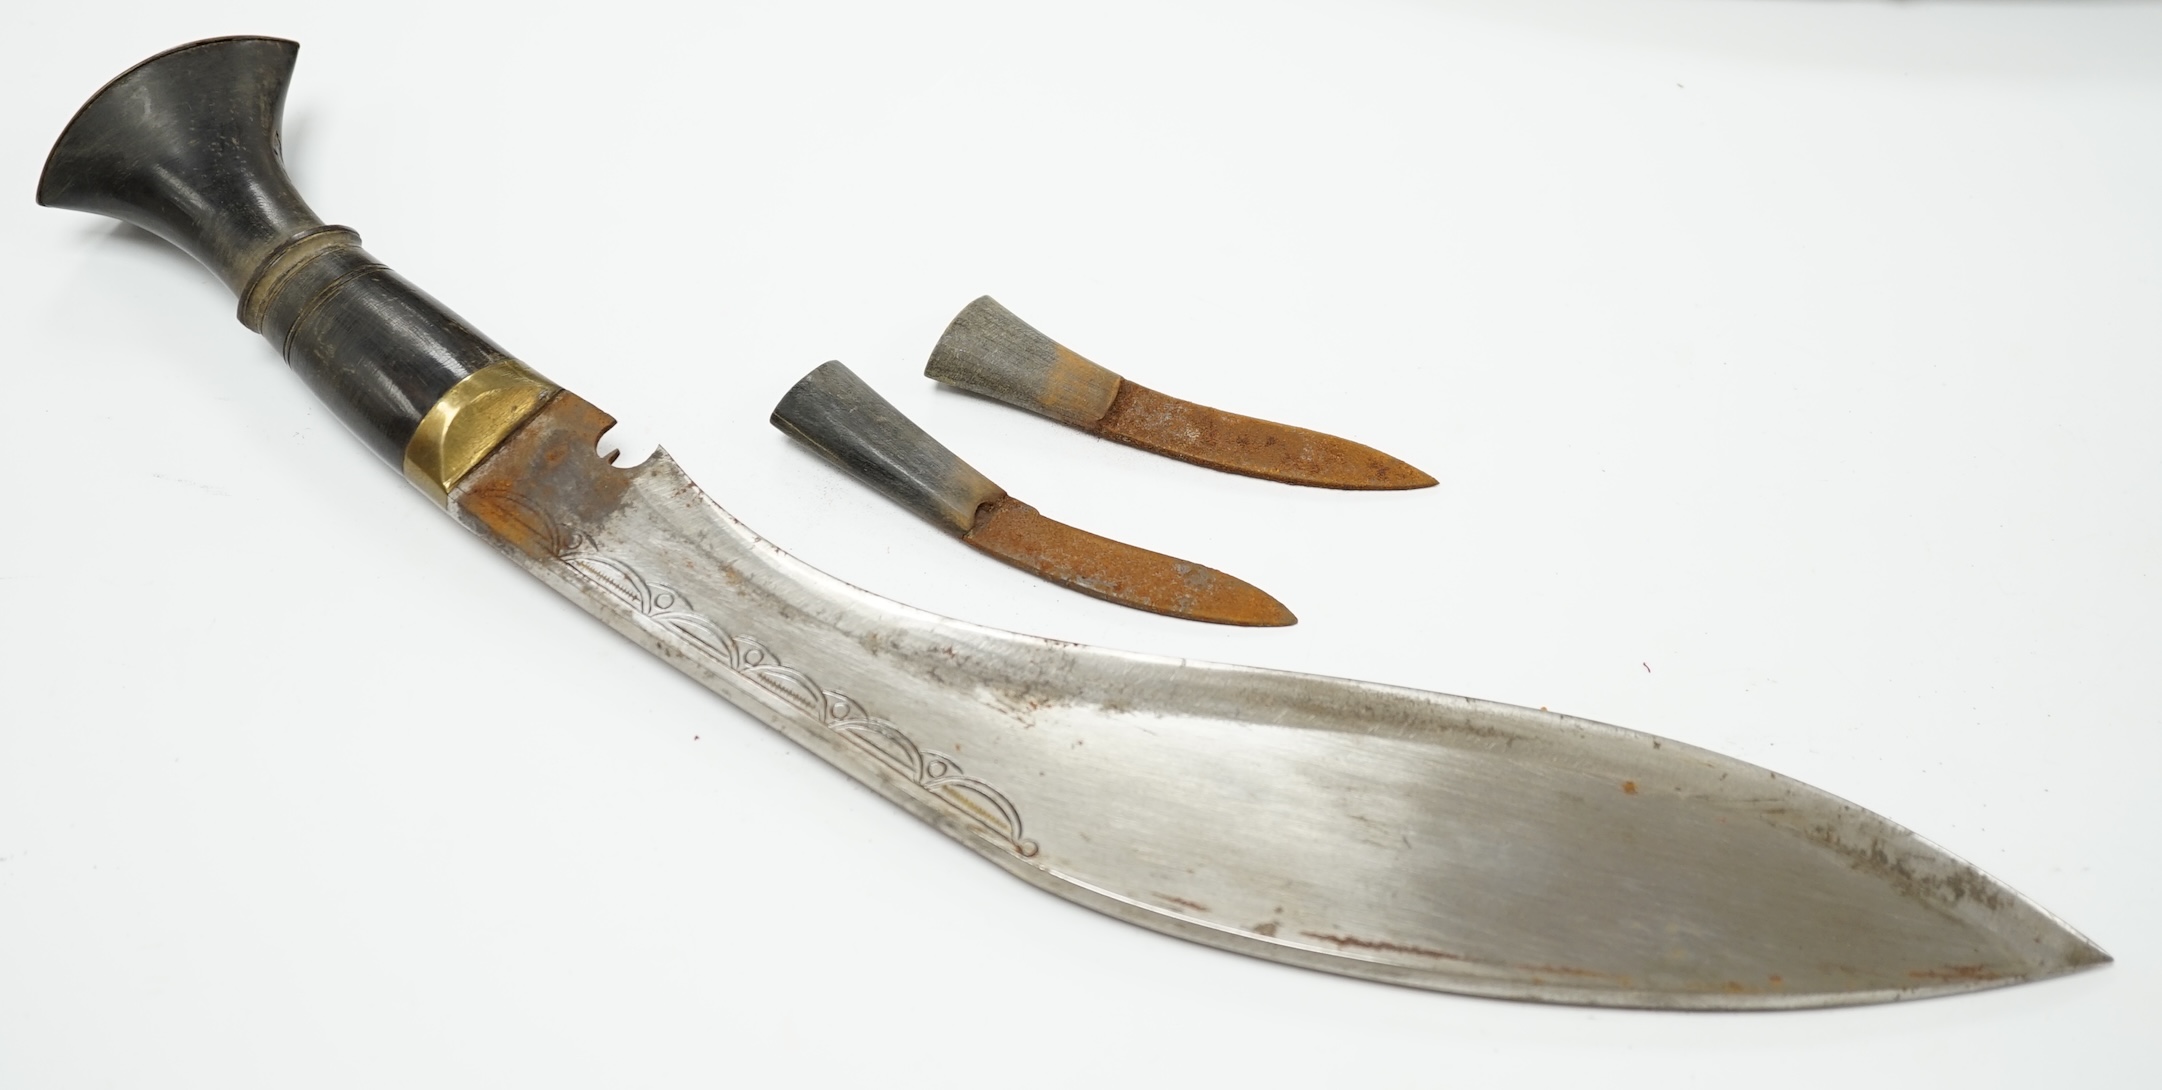 A pair of Indian Kukri, c.1950, brass mounted horn hilts, in velvet sheaths with embossed silver mounts. Condition - fair to good